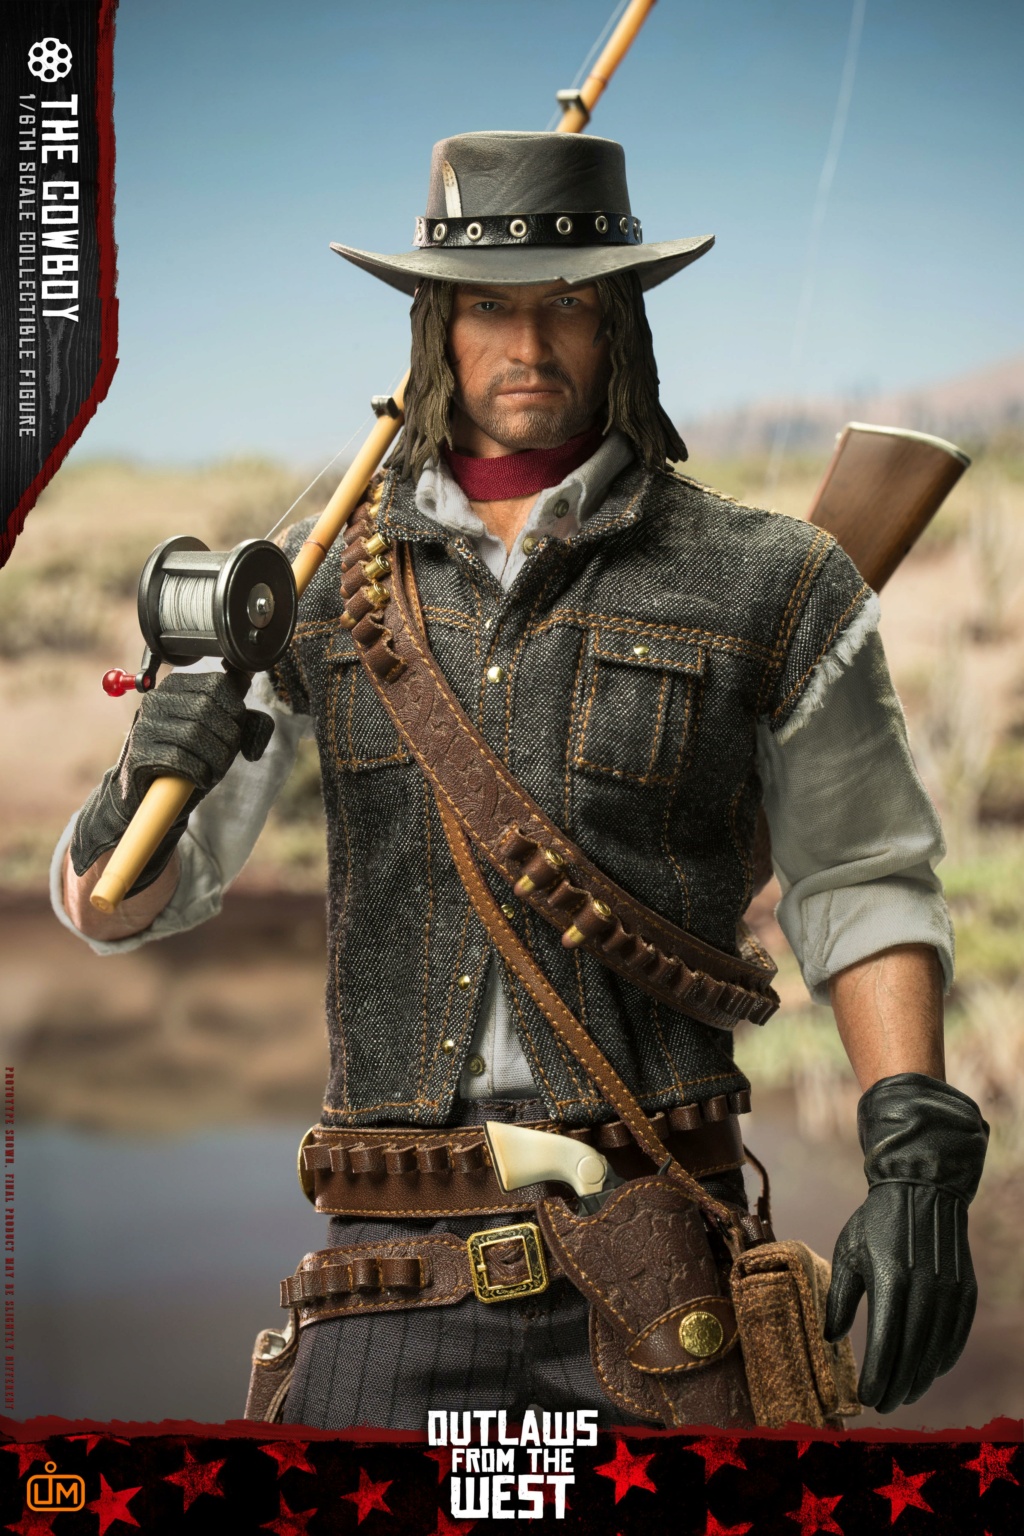 OutlawsOfTheWest - NEW PRODUCT: LIM TOYS: Outlaws of the West Series: The Cowboy 1/6 scale action figure 41694910